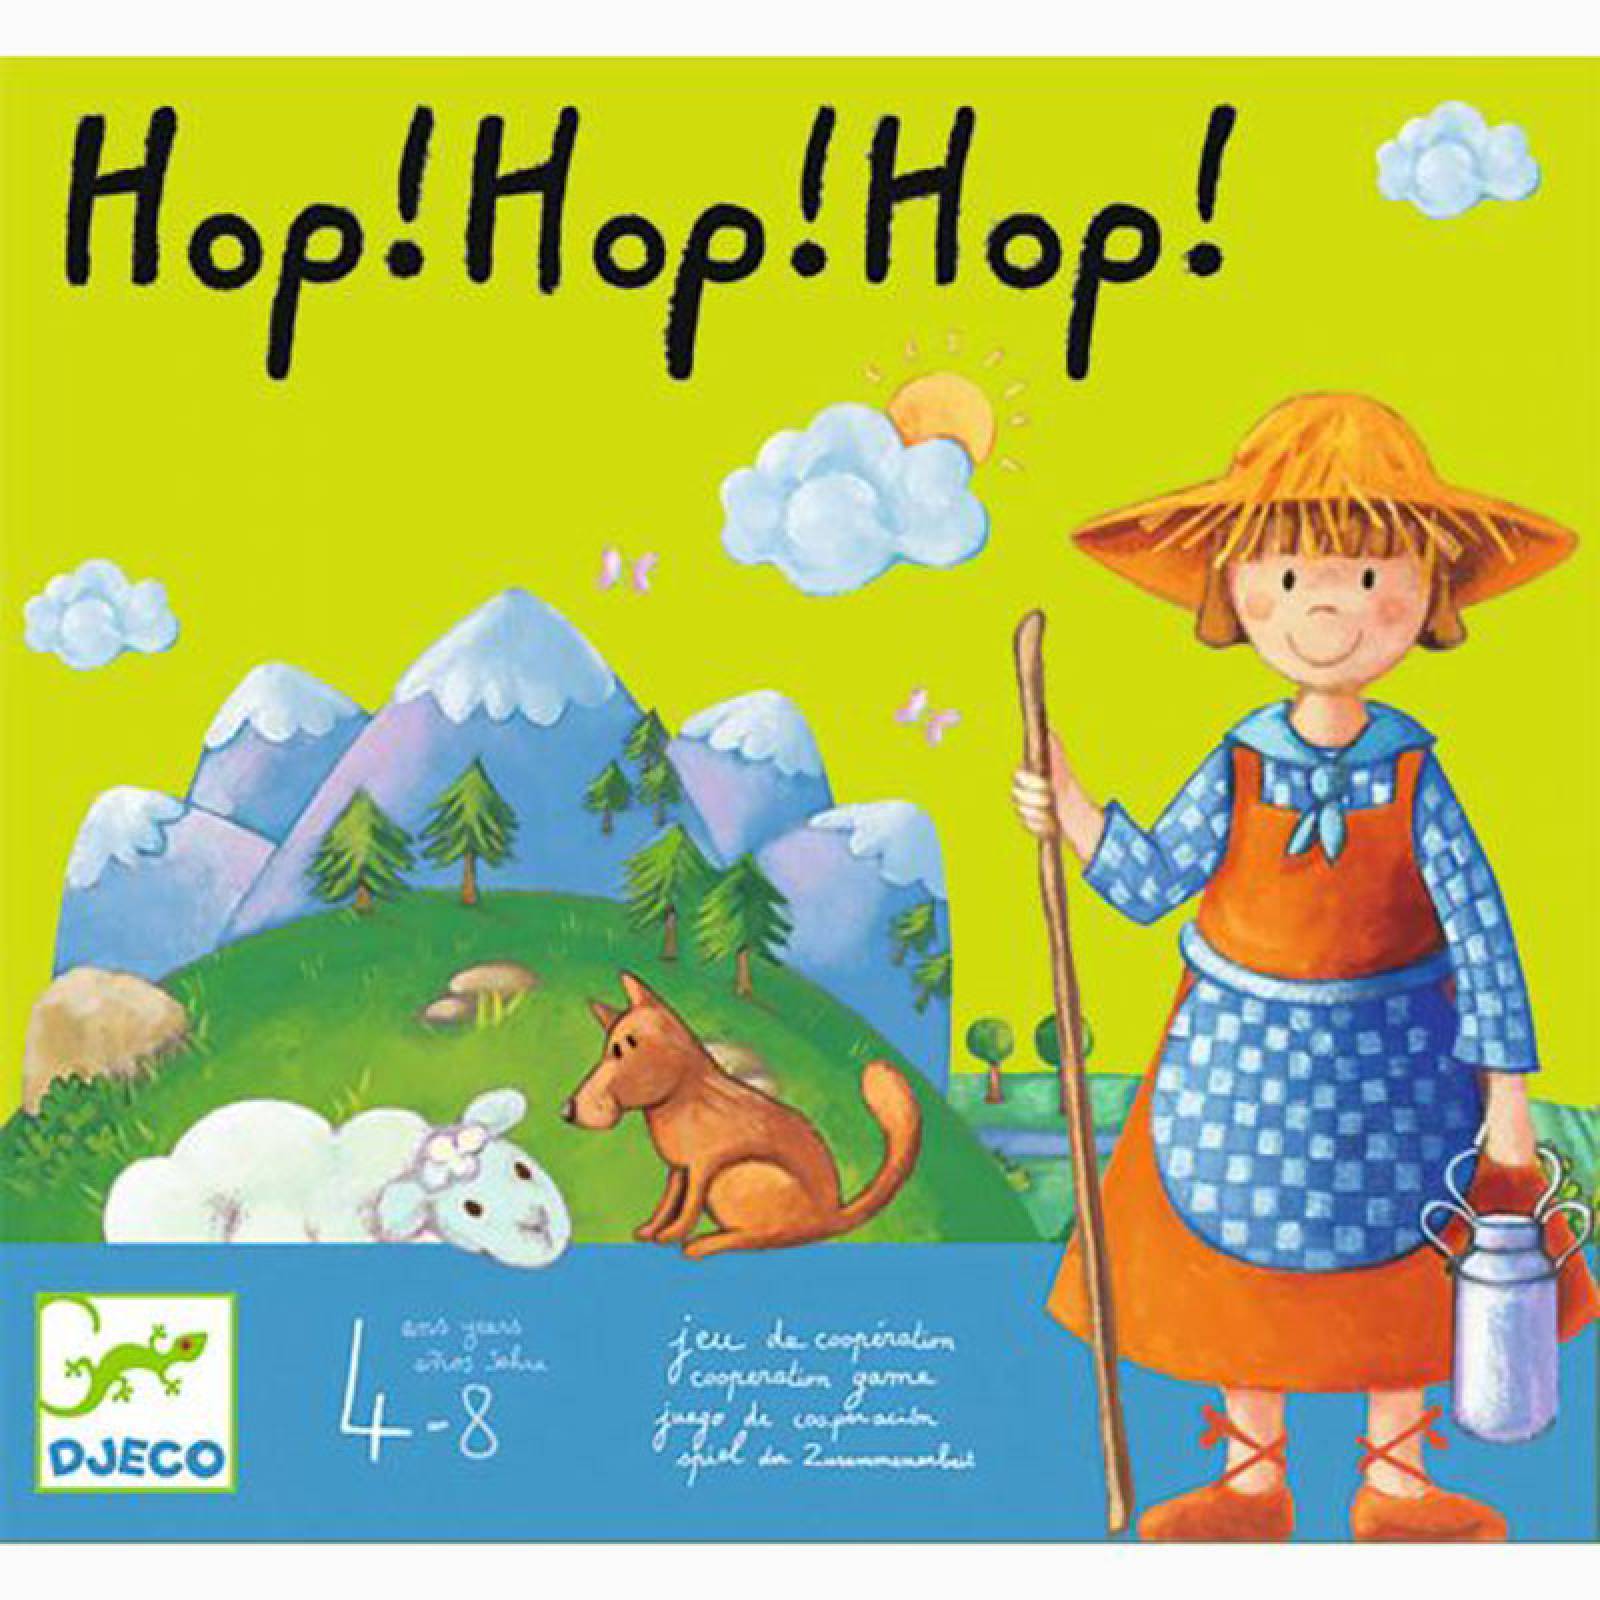 Hop! Hop! Hop! Game By Djeco 4-8yrs